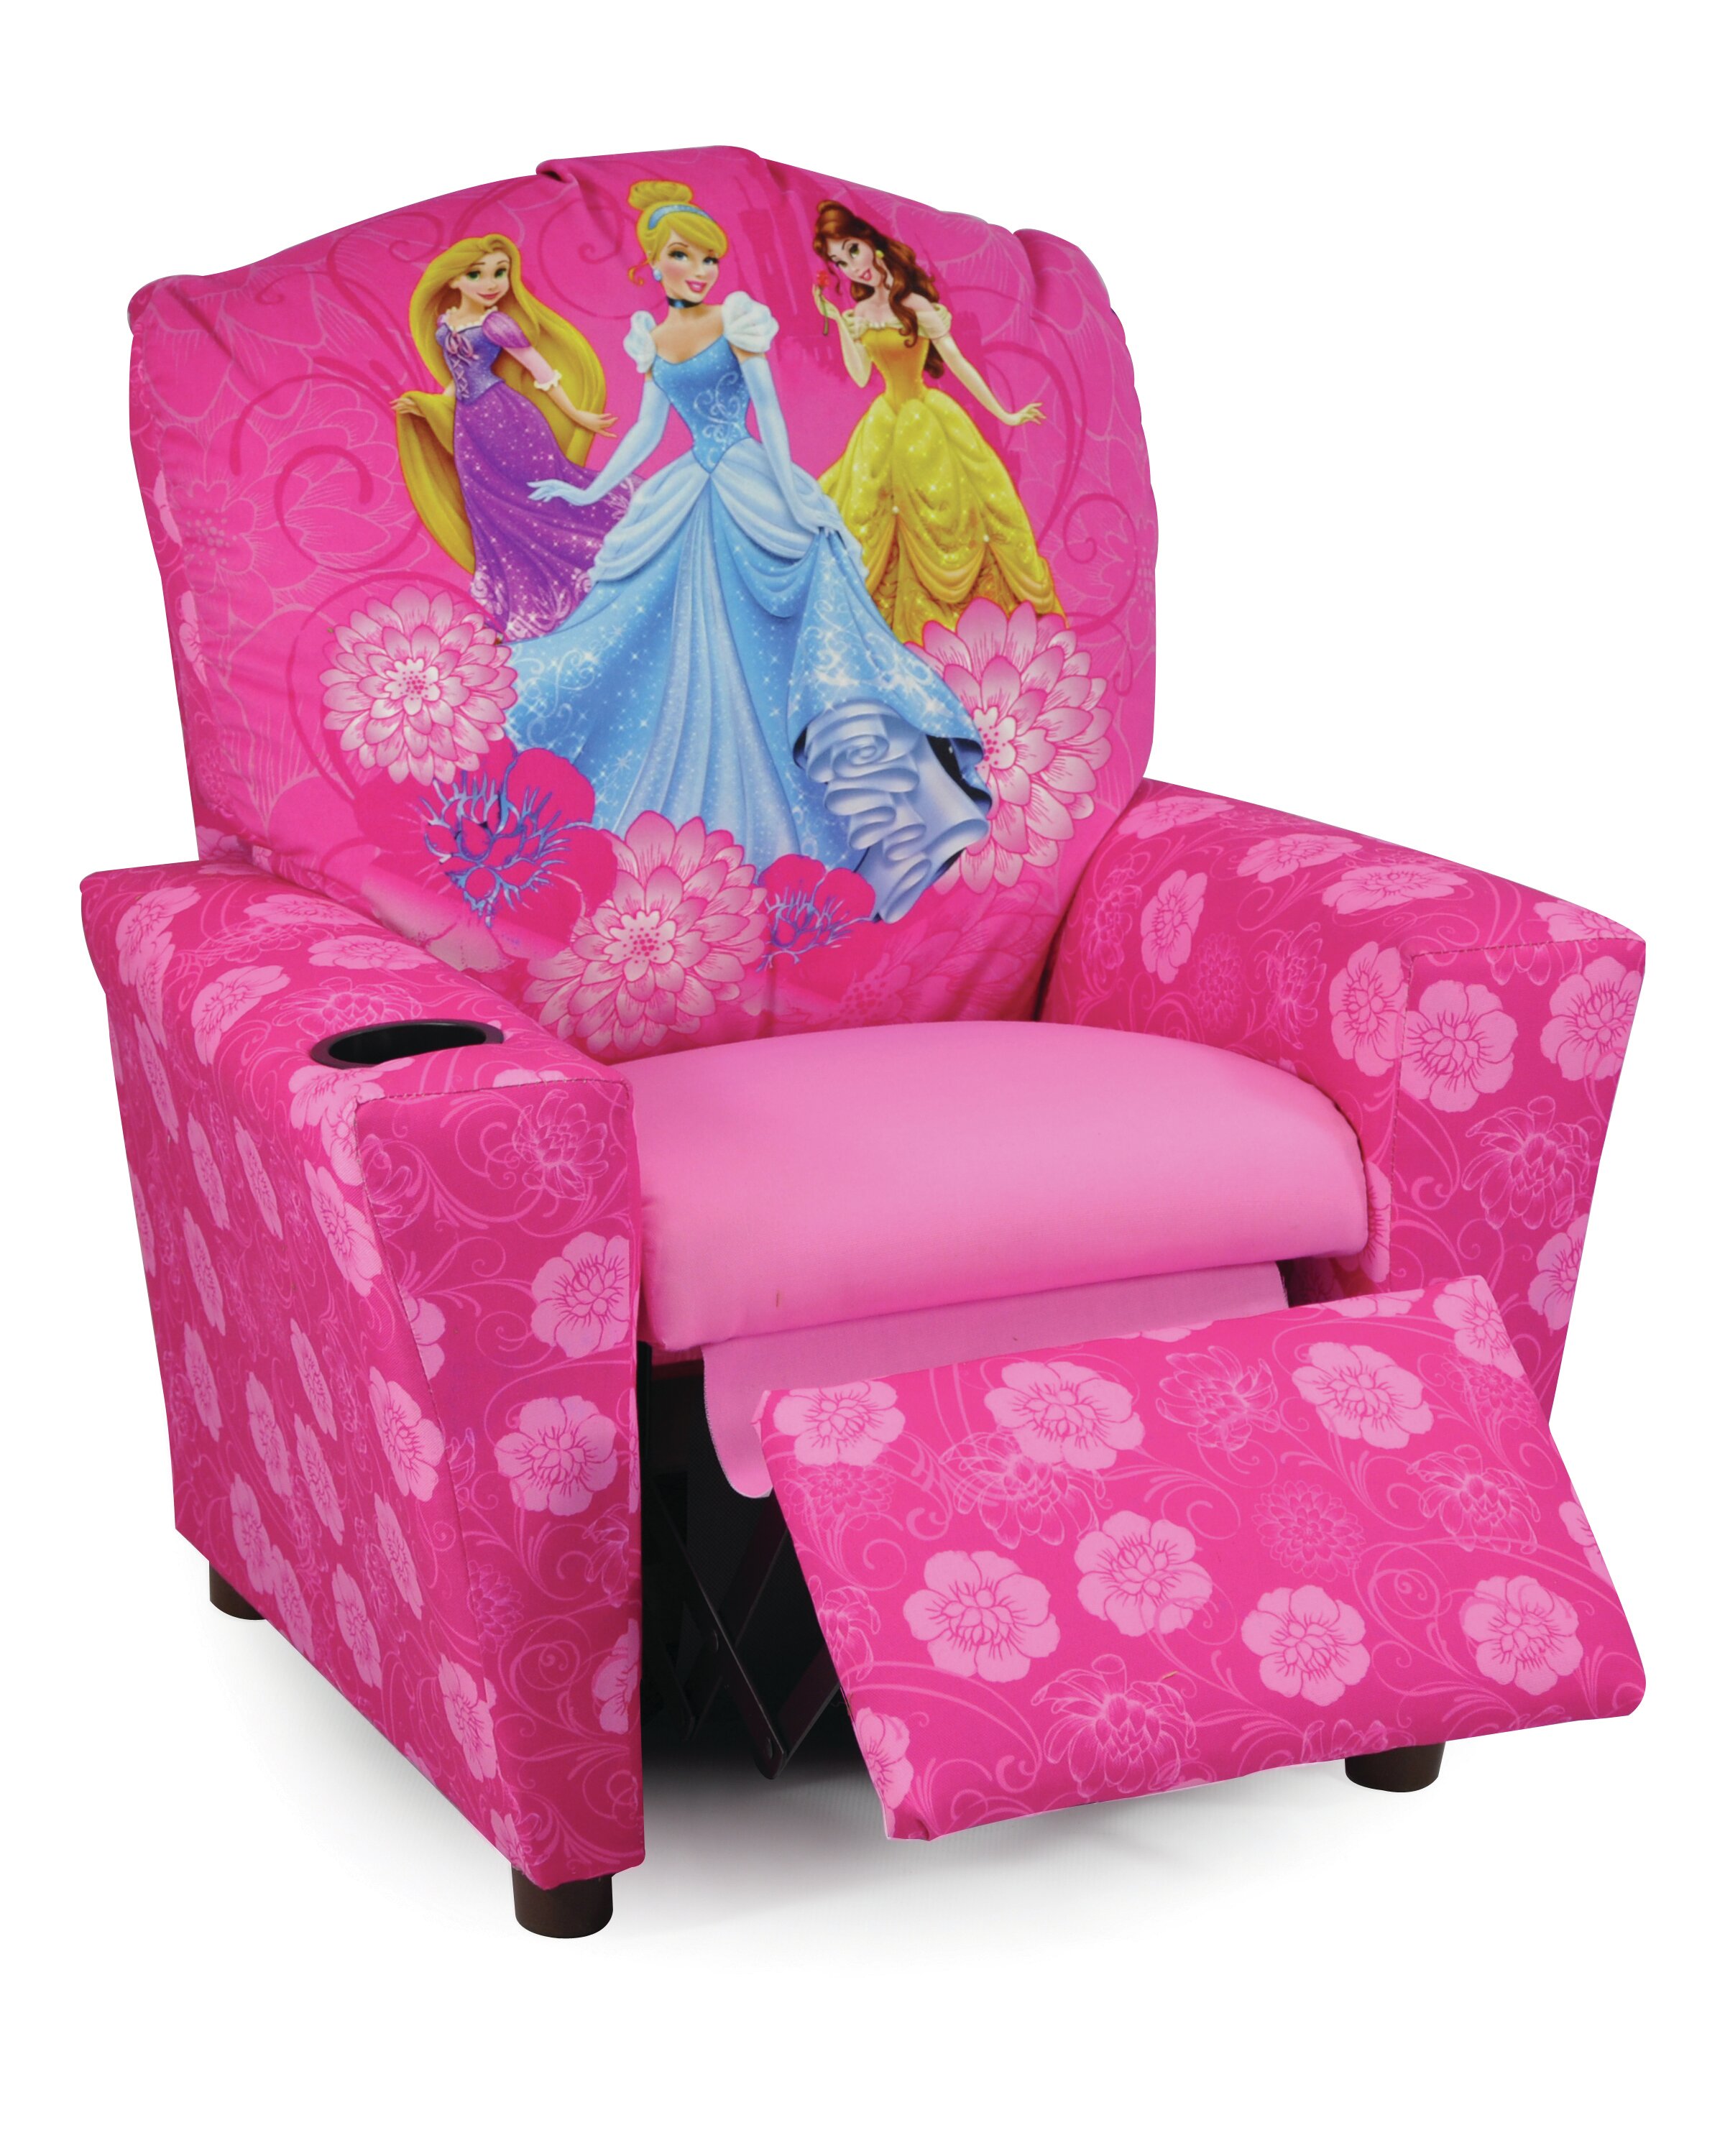 princess chair for toddlers